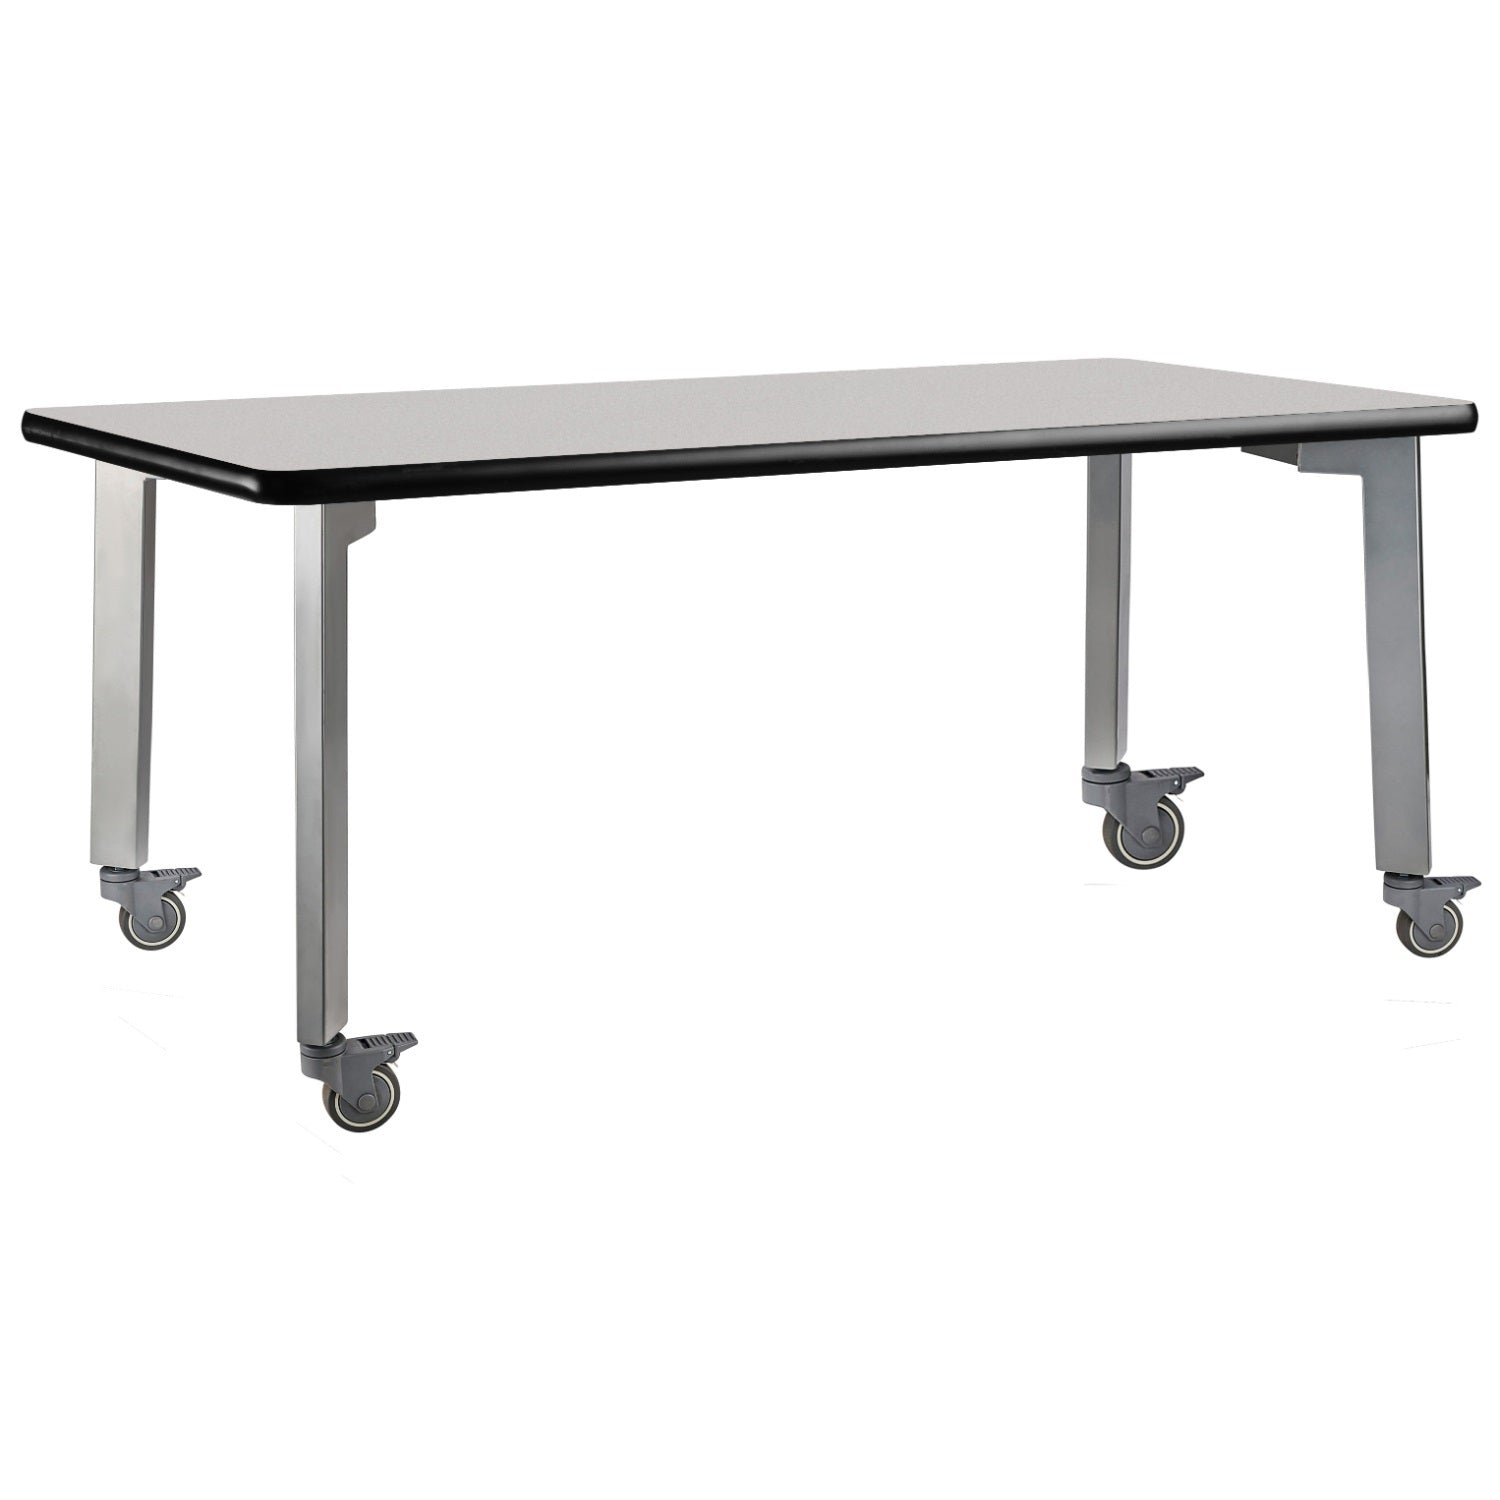 Titan Mobile Table, 48" x 48", Standard High Pressure Laminate Top with Particleboard Core and T-Mold Edge